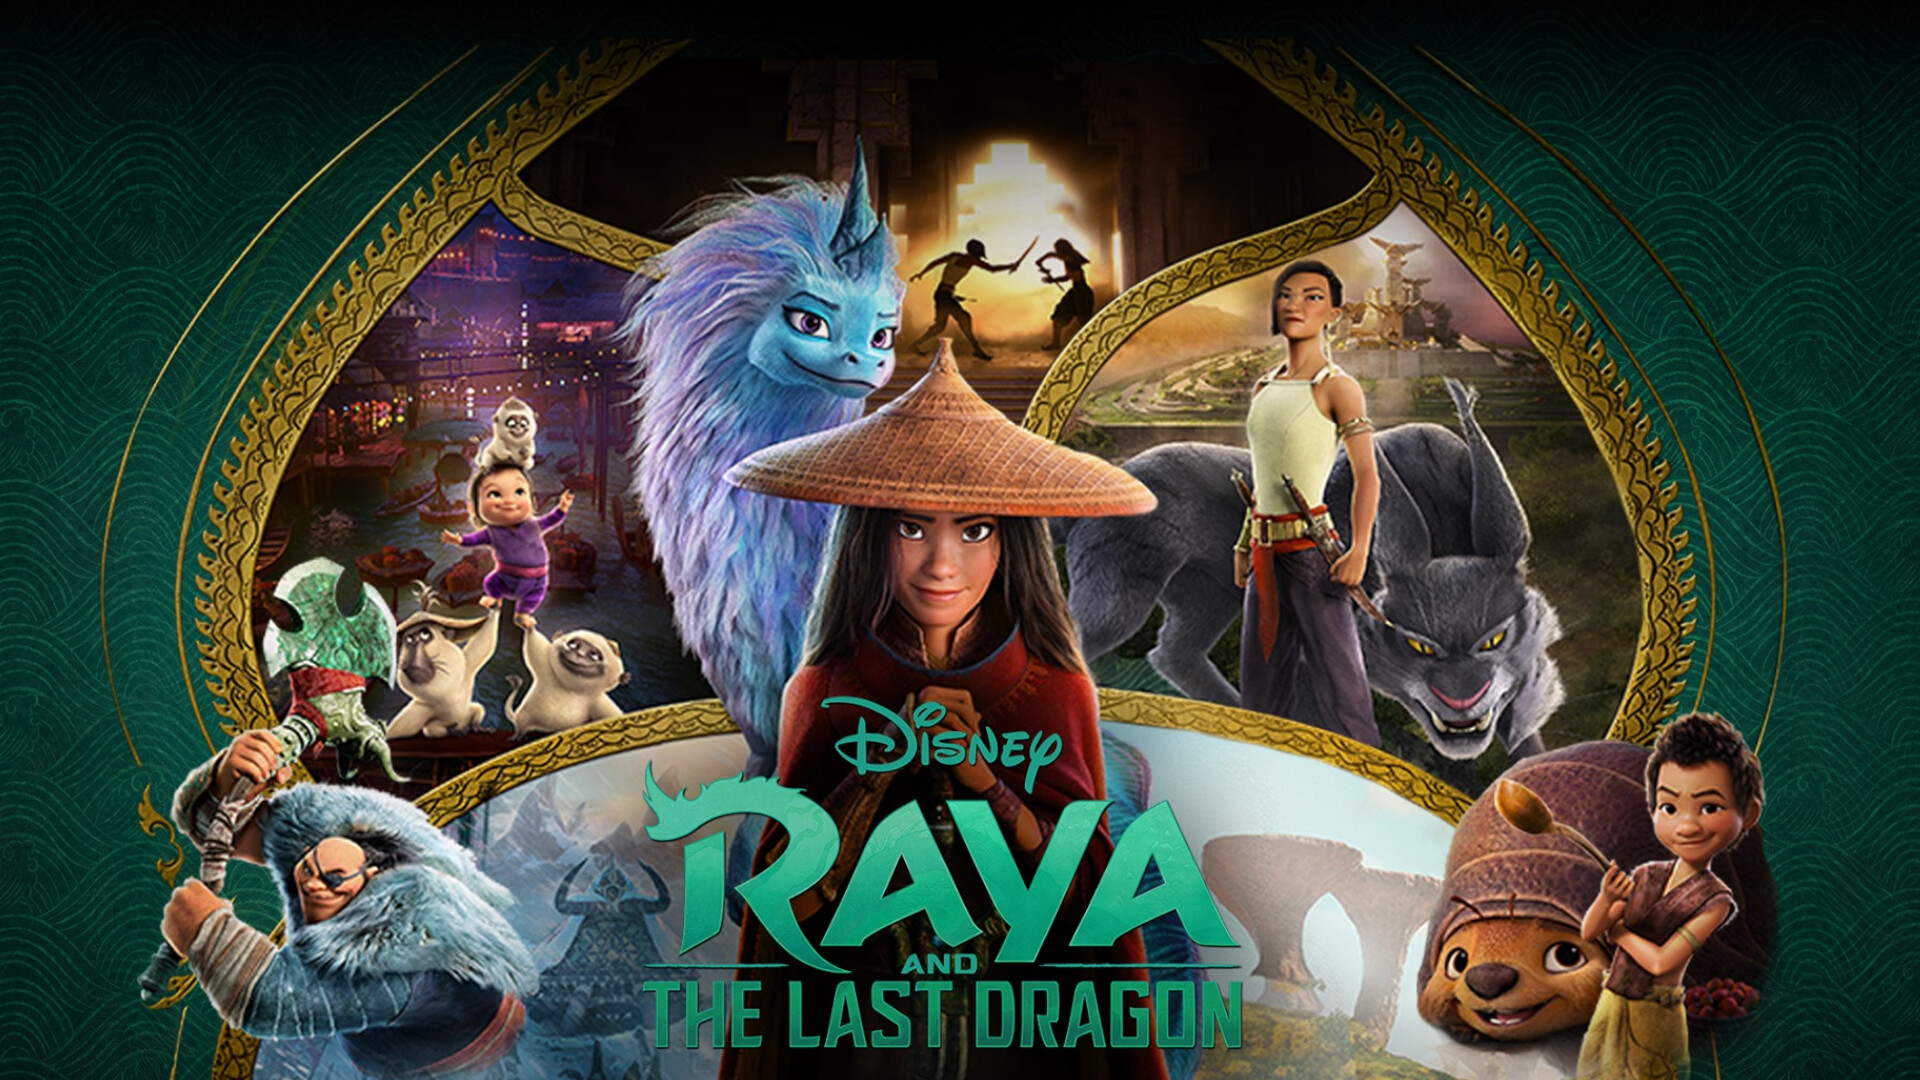 Raya and the Last Dragon: The directorial debut for Paul Briggs, Animated film. 1920x1080 Full HD Background.